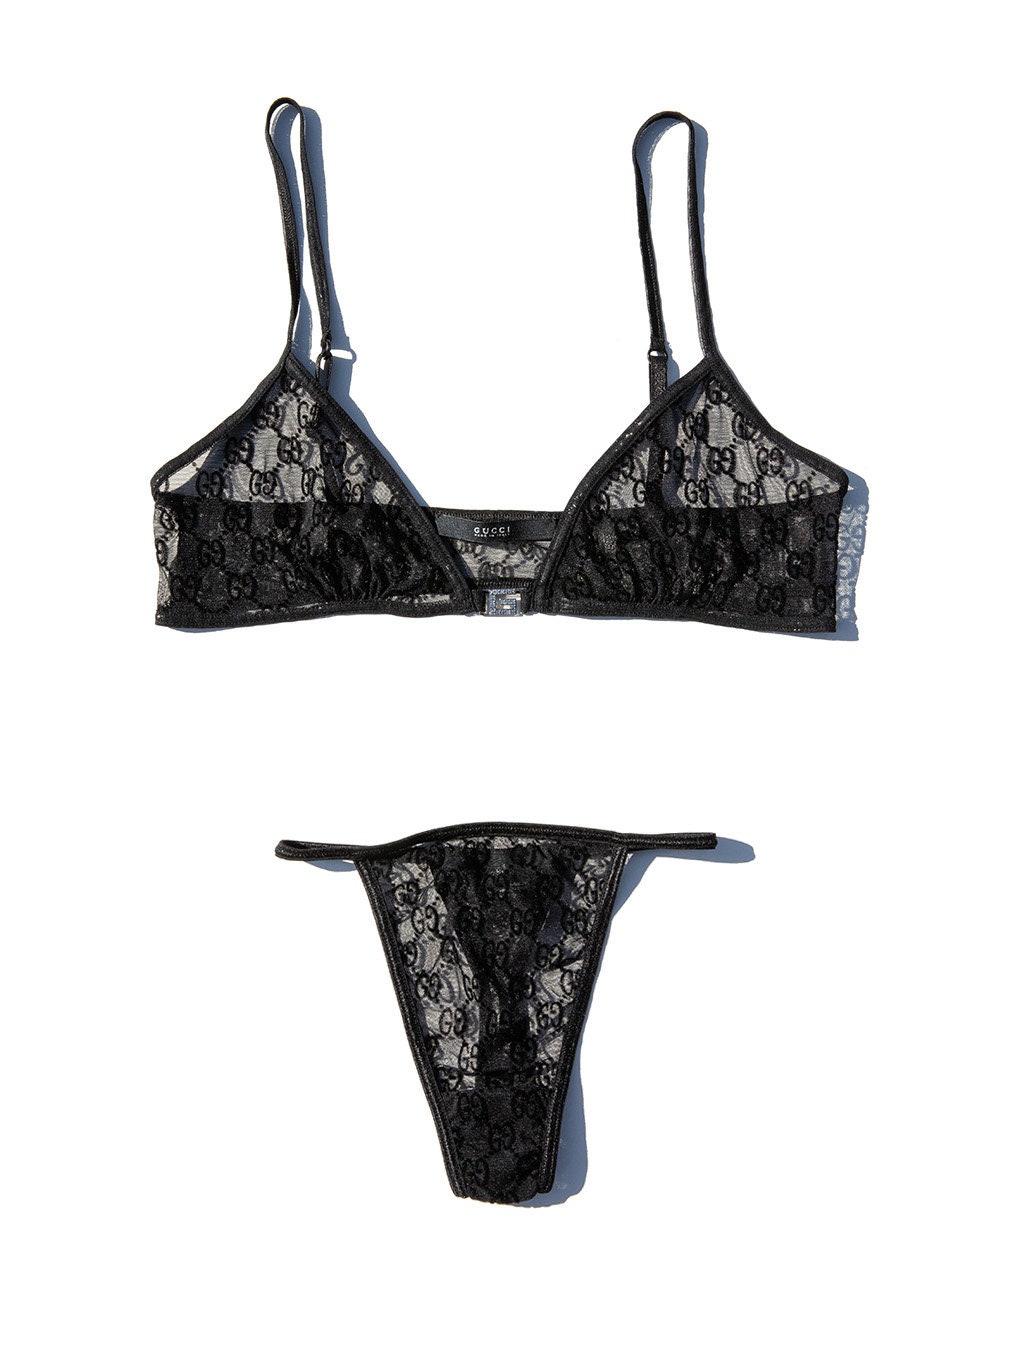 Extremely Rare Vintage SS 1998 Tom Ford Gucci Mesh and Velvet Monogram  Lingerie Set Featuring G Encrusted With Swarovski Crystals Sz S/XS -   Canada